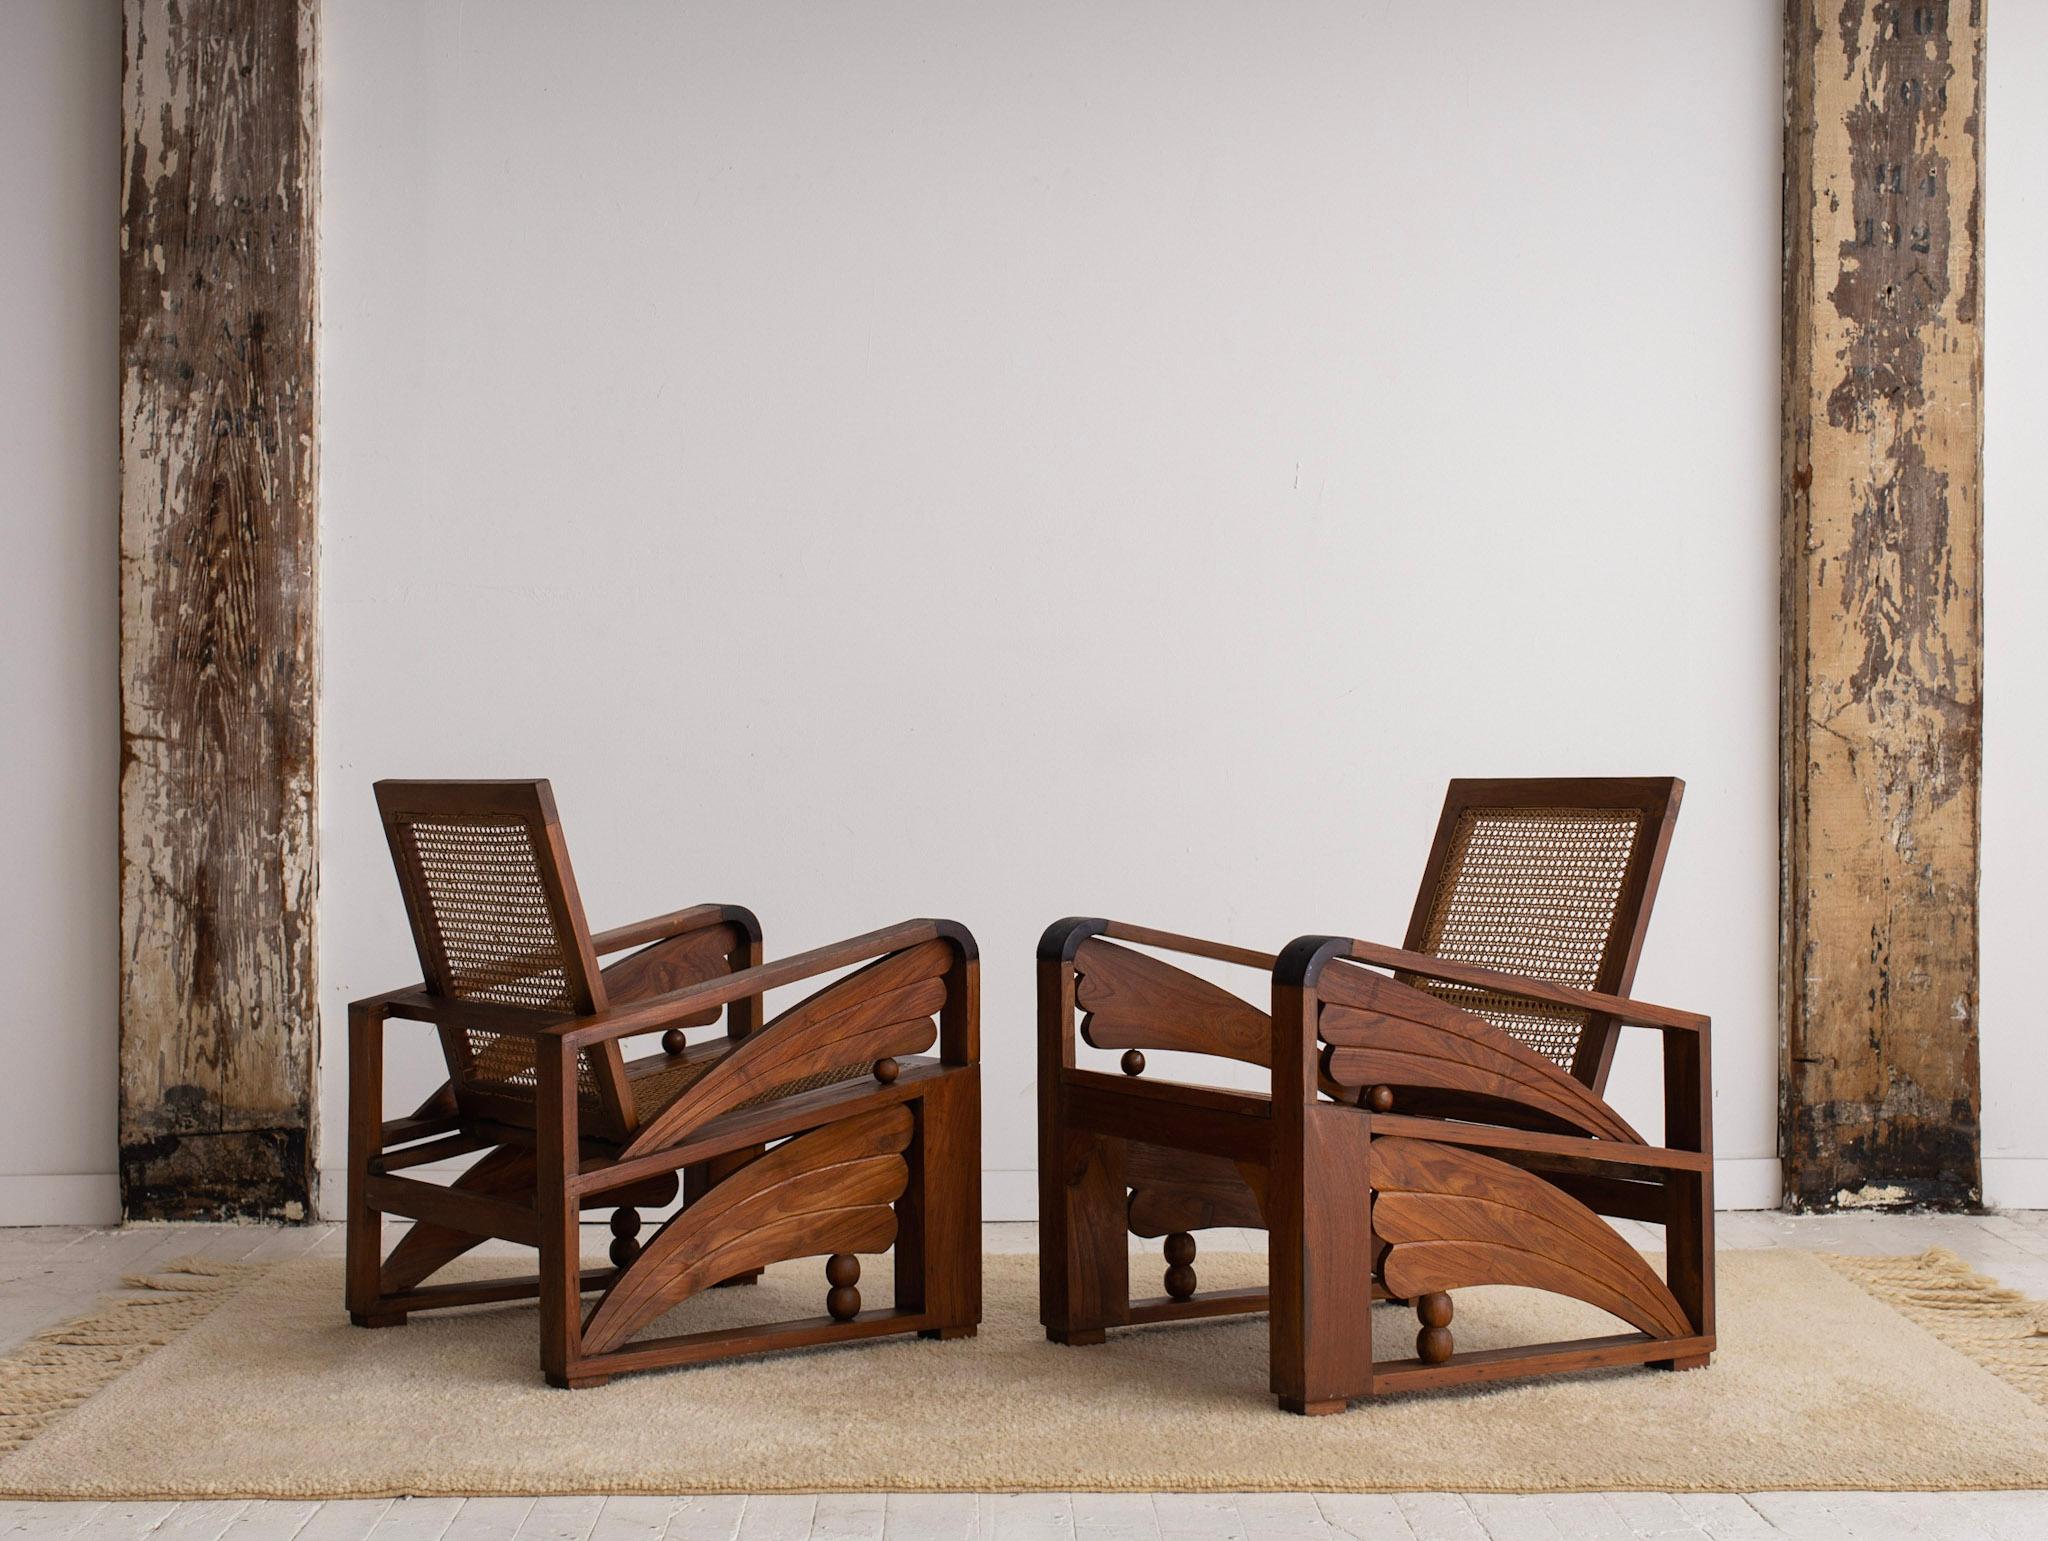 Indian British Colonial Art Deco Teak and Cane Chairs, a Pair